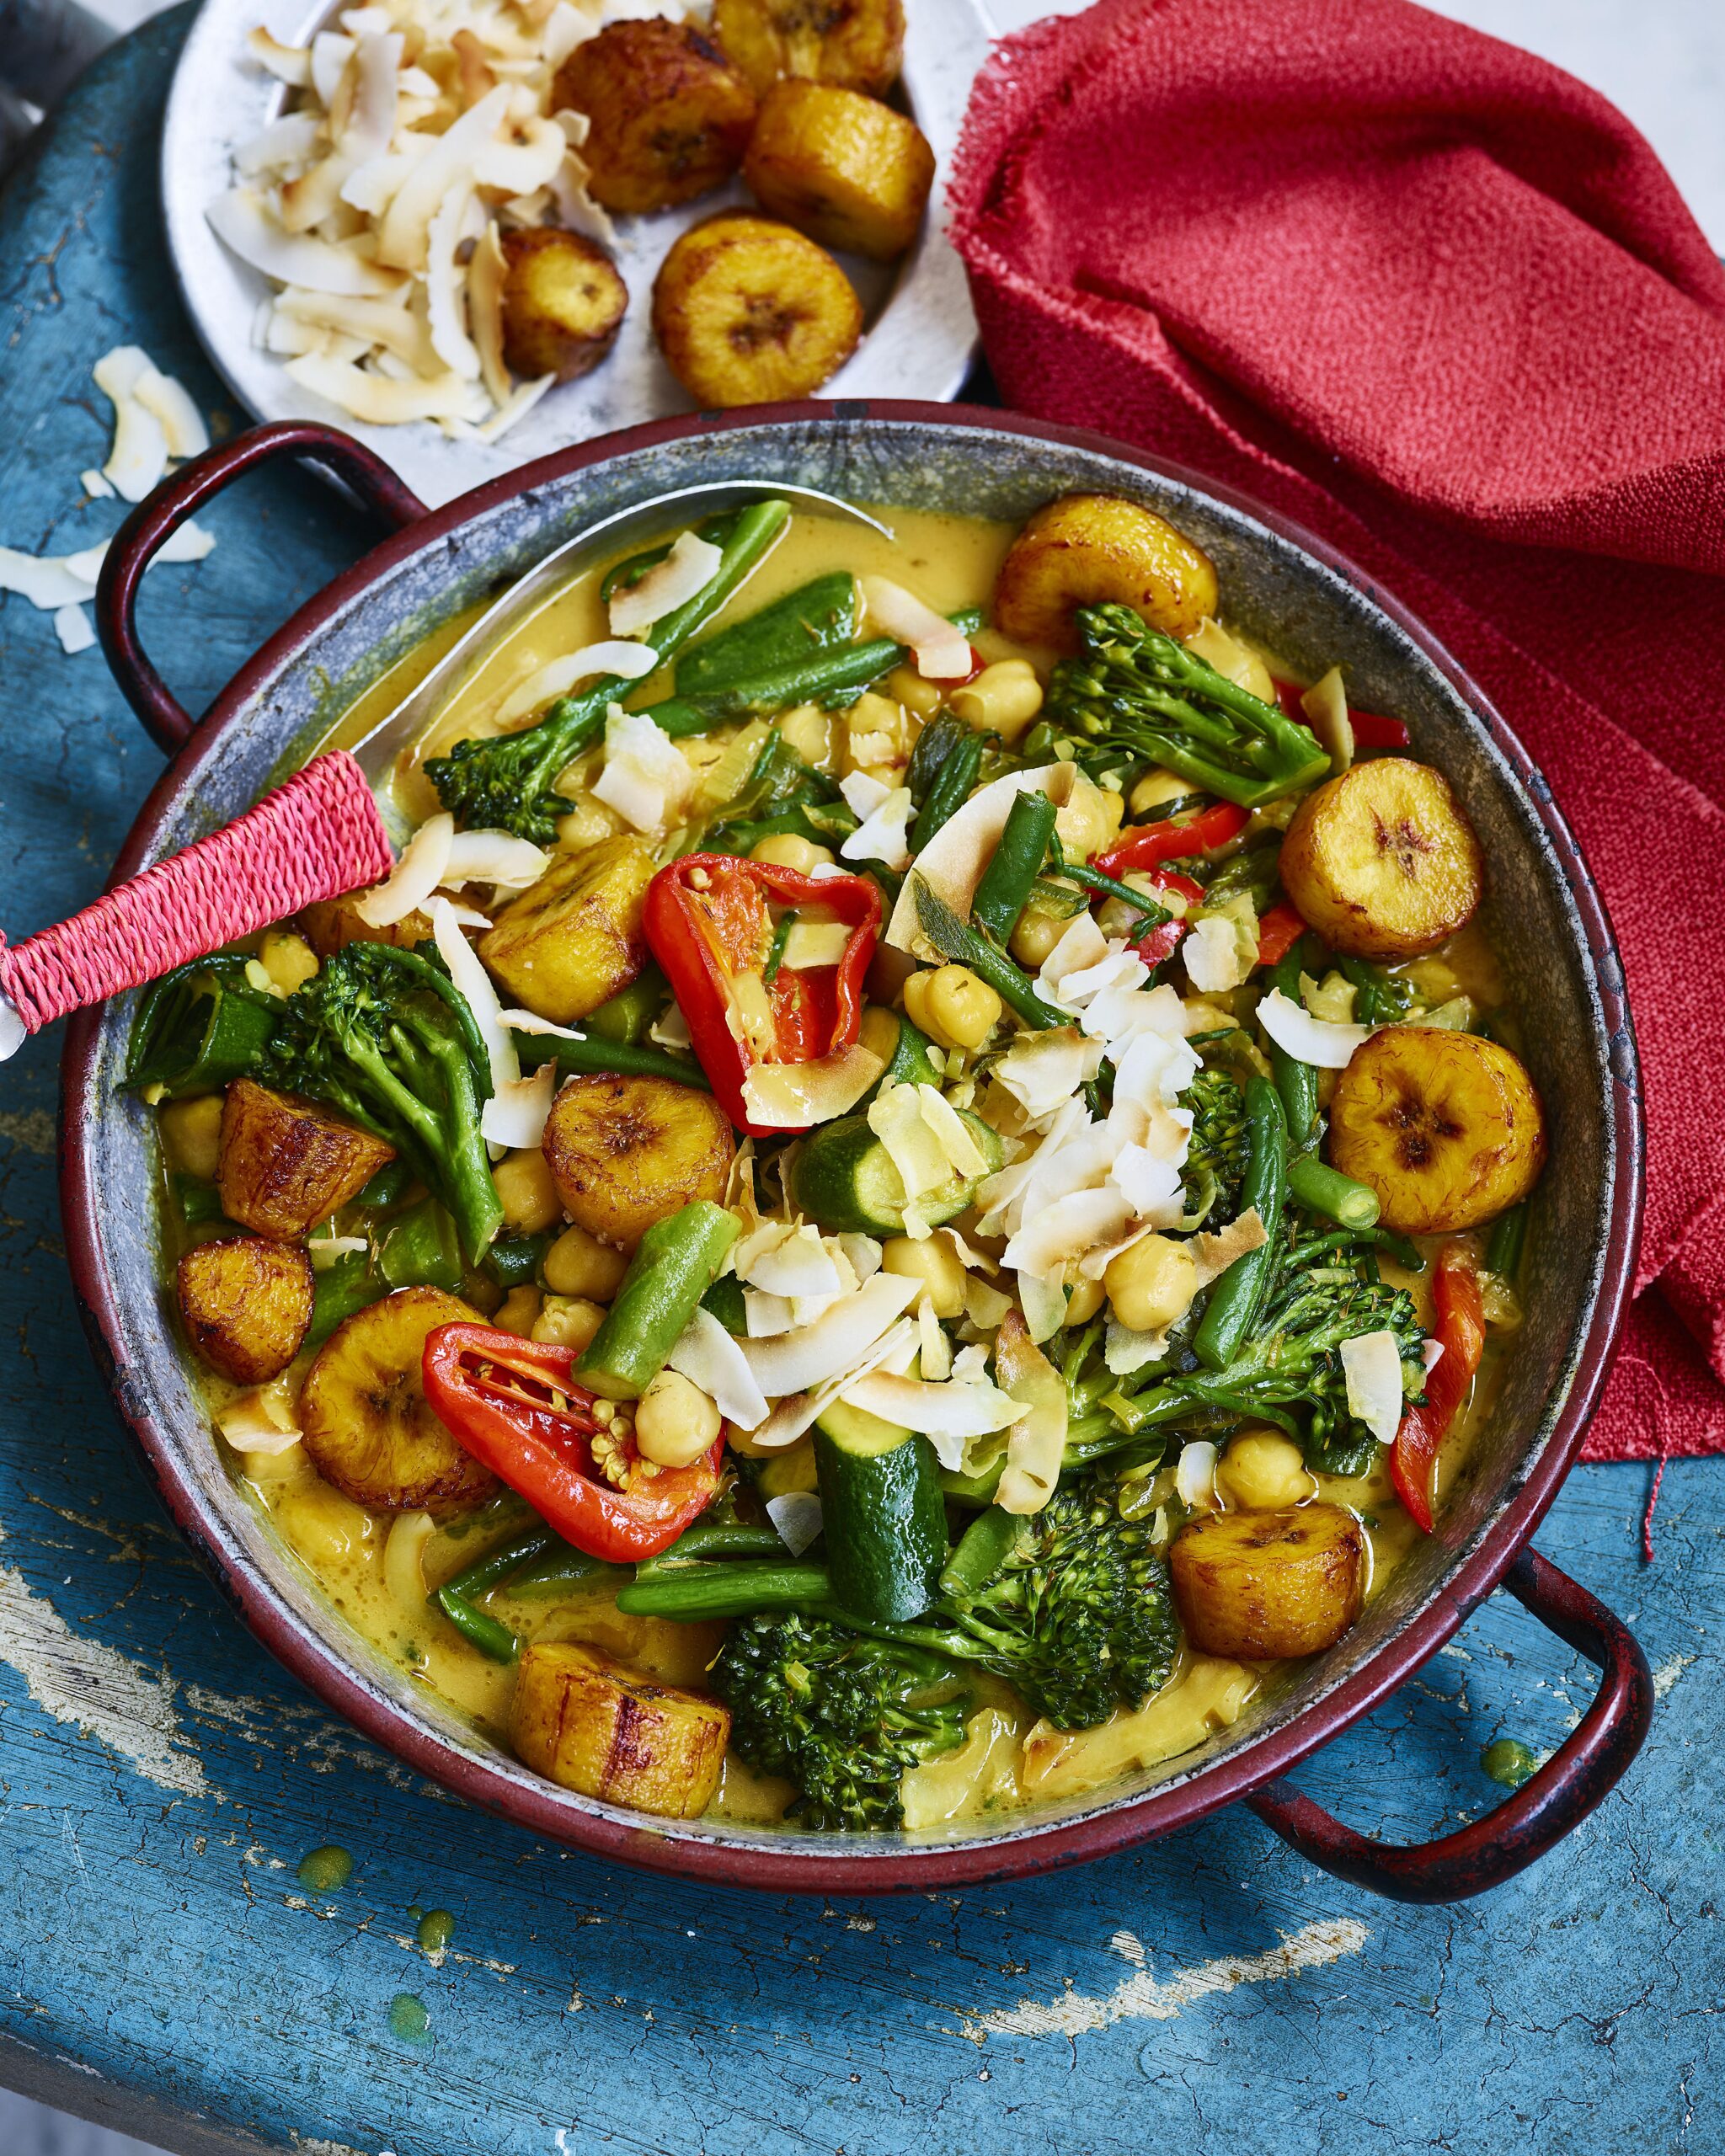  A vibrant, plant-based dish that's sure to impress any dinner guest